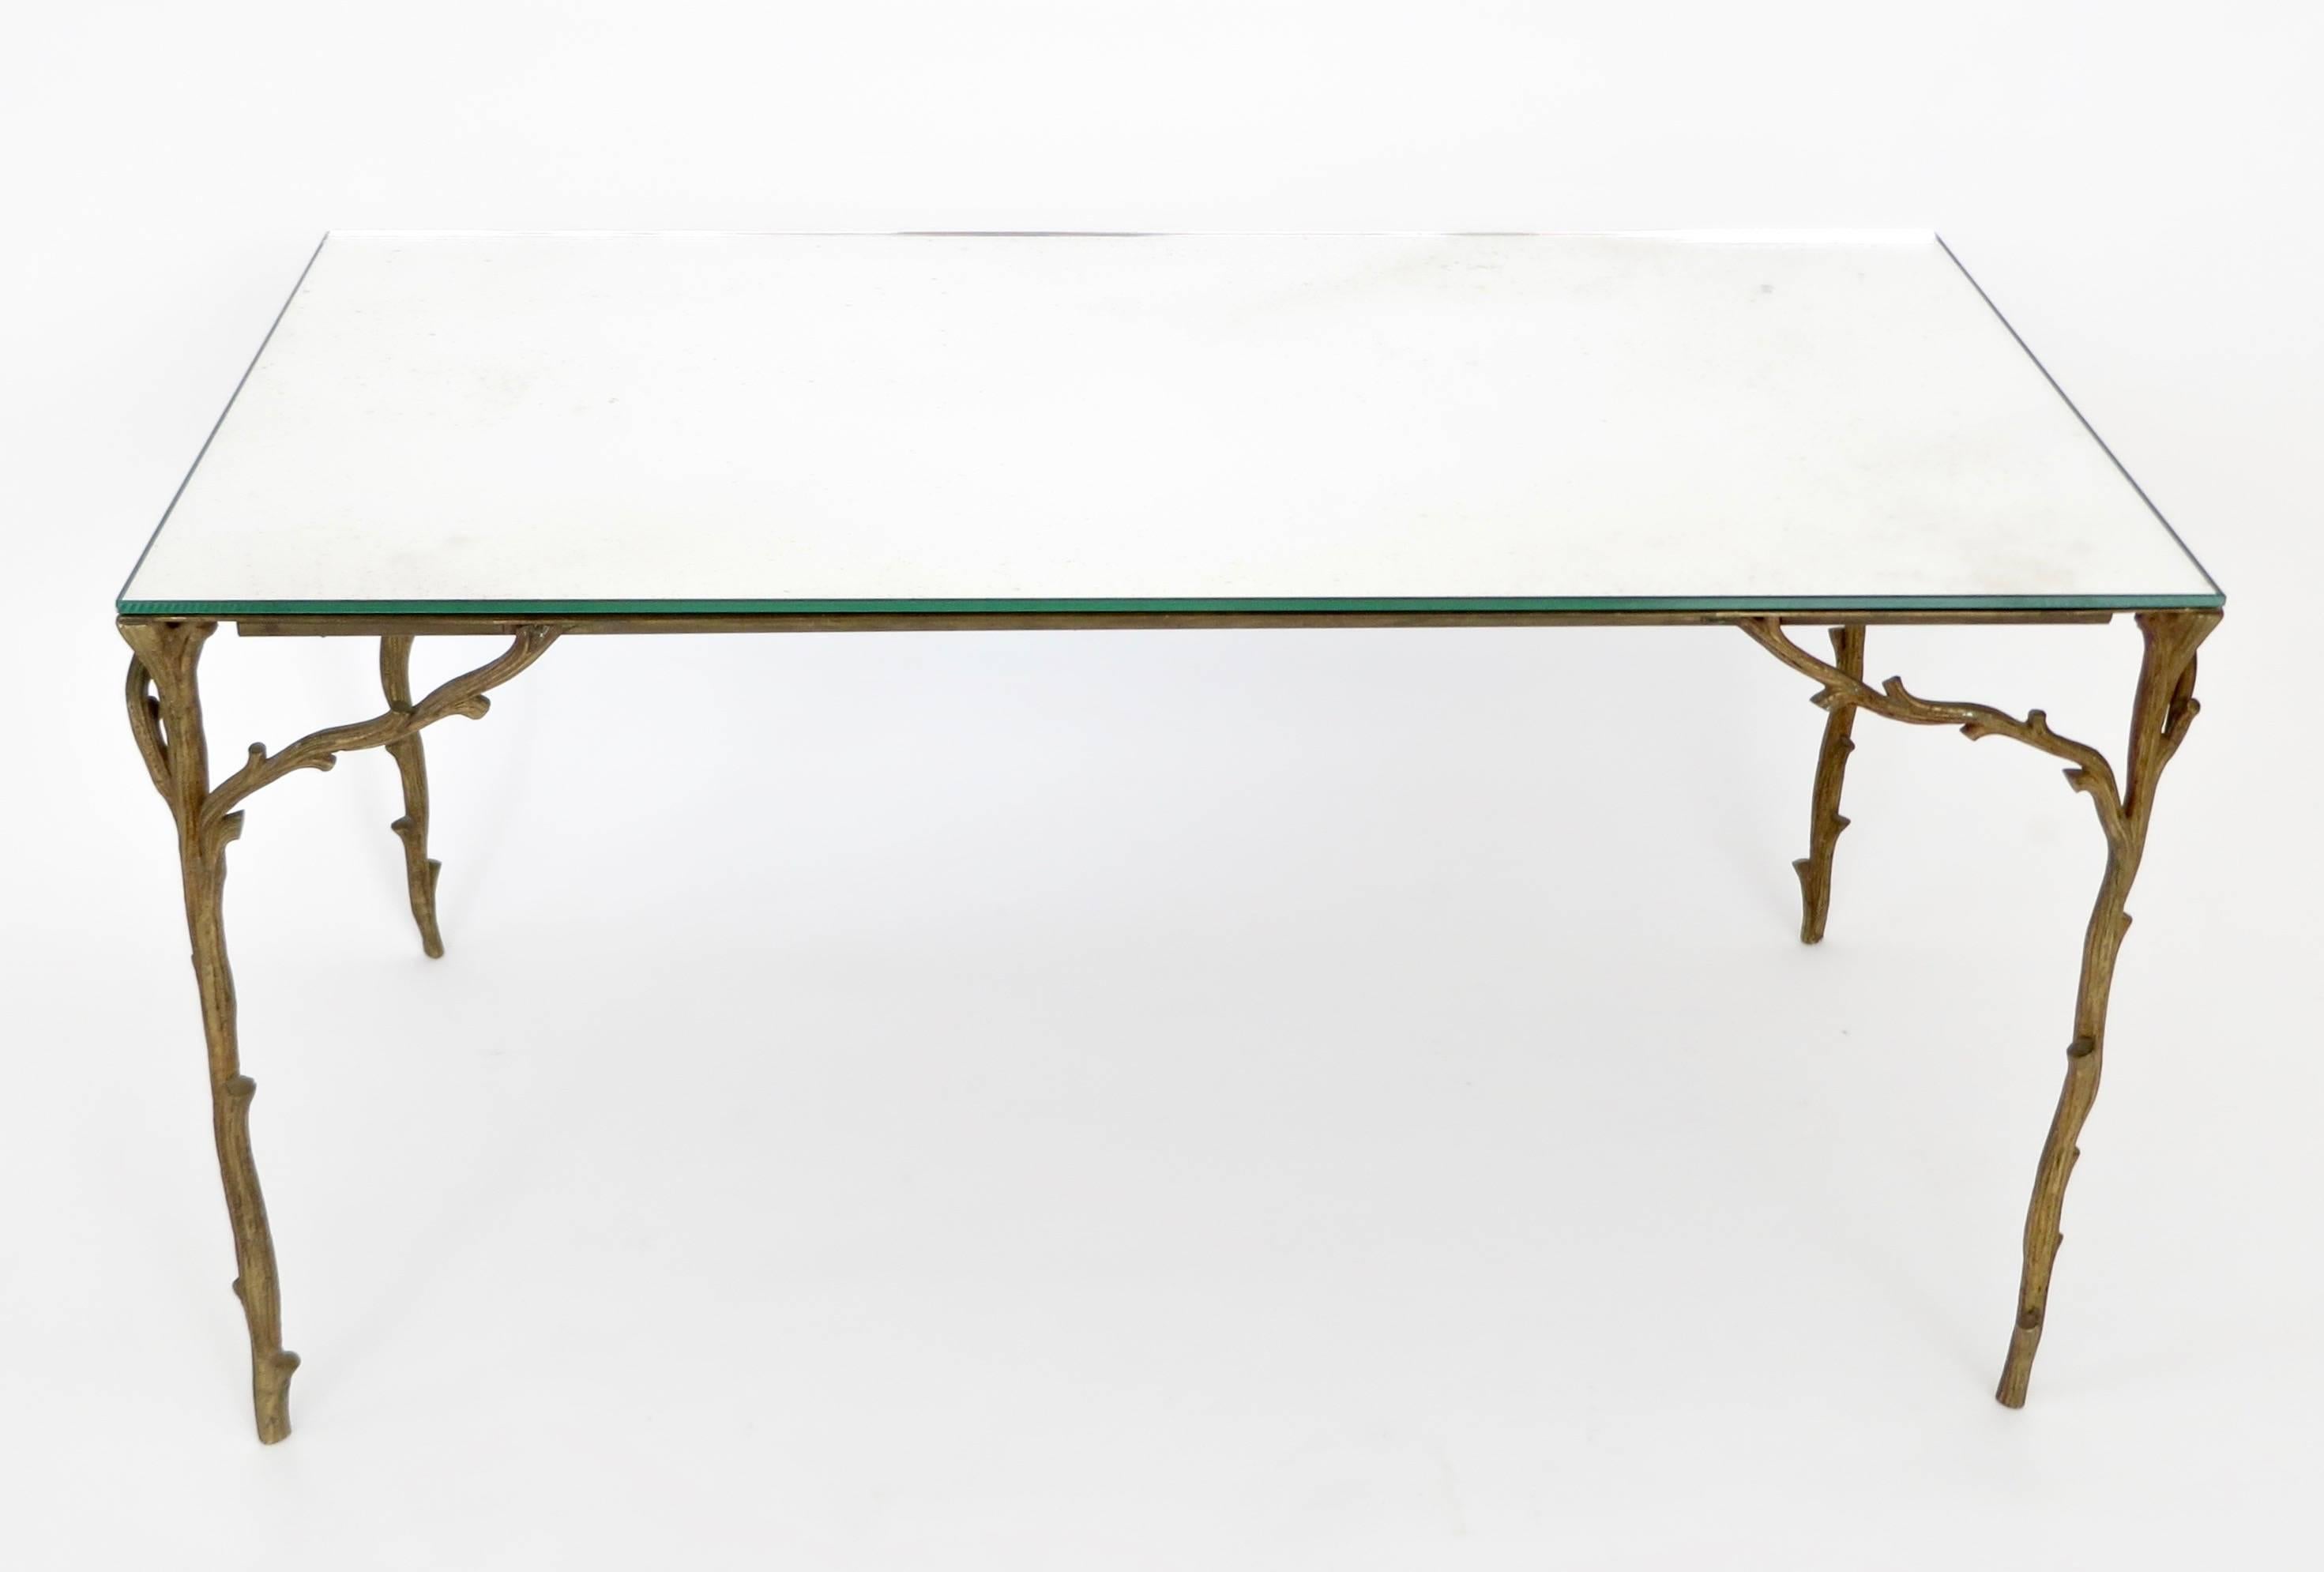 This Maison Bagues bronze based coffee table with very animated bronze legs of branches and not the typical faux bamboo makes it more rare. 
The vegetal and wood shaped design ornament is very organic and lyrical.
The top is a mirrored glass with a